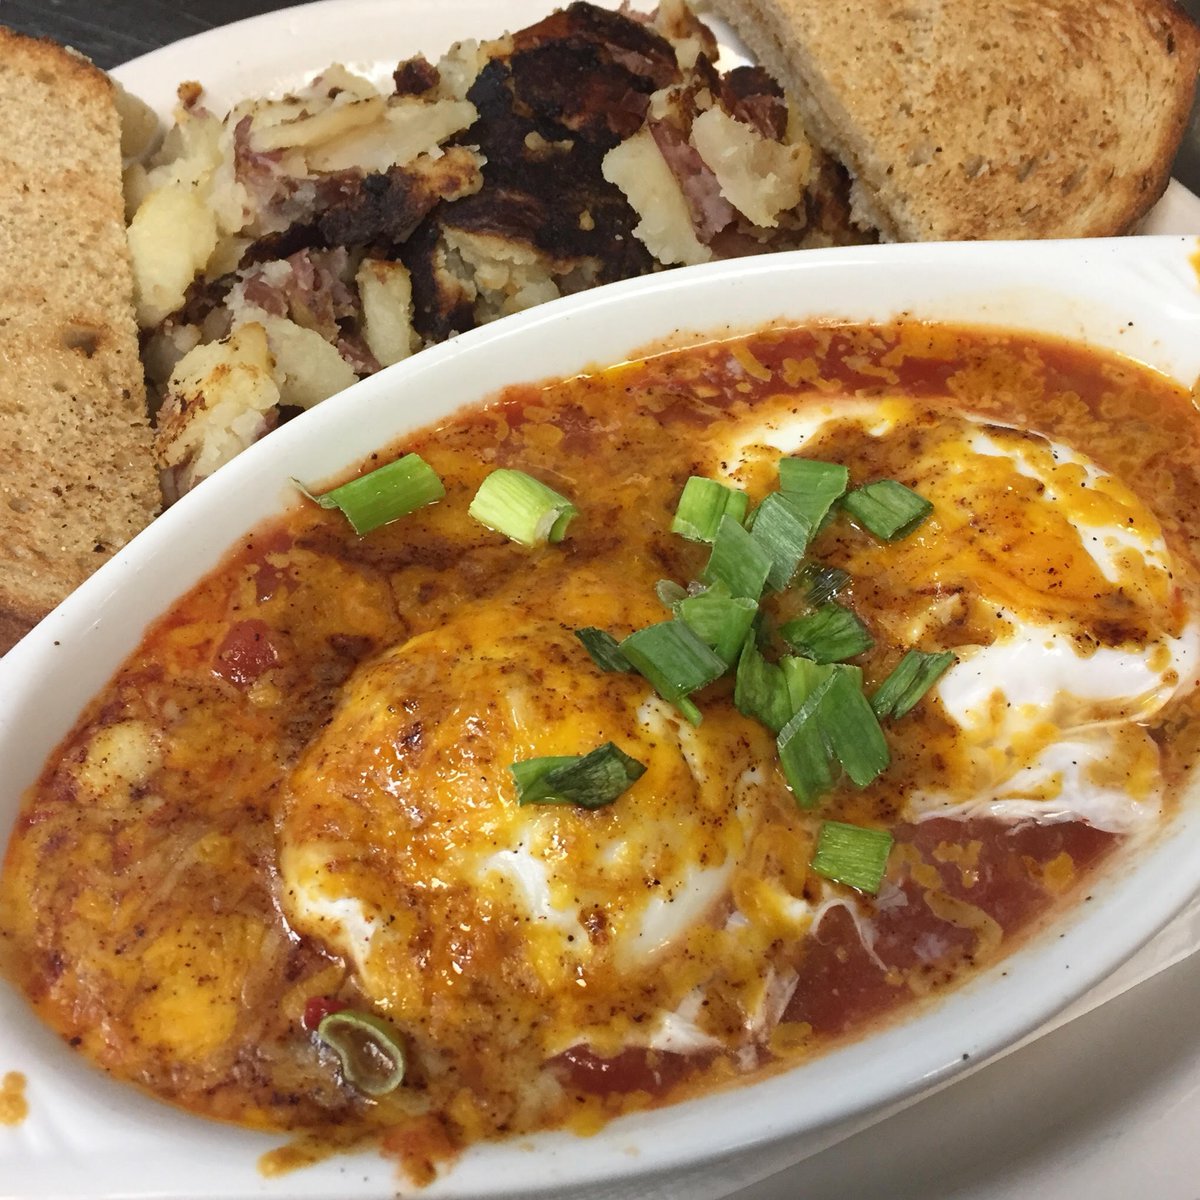 This weekend's breakfast special is: Eggs in Purgatory!  Stop in today or tomorrow at either location to try out the deliciousness!  

#breakfastspecial #eggsinpurgatory #jakeseatery #newtownpa #richboropa